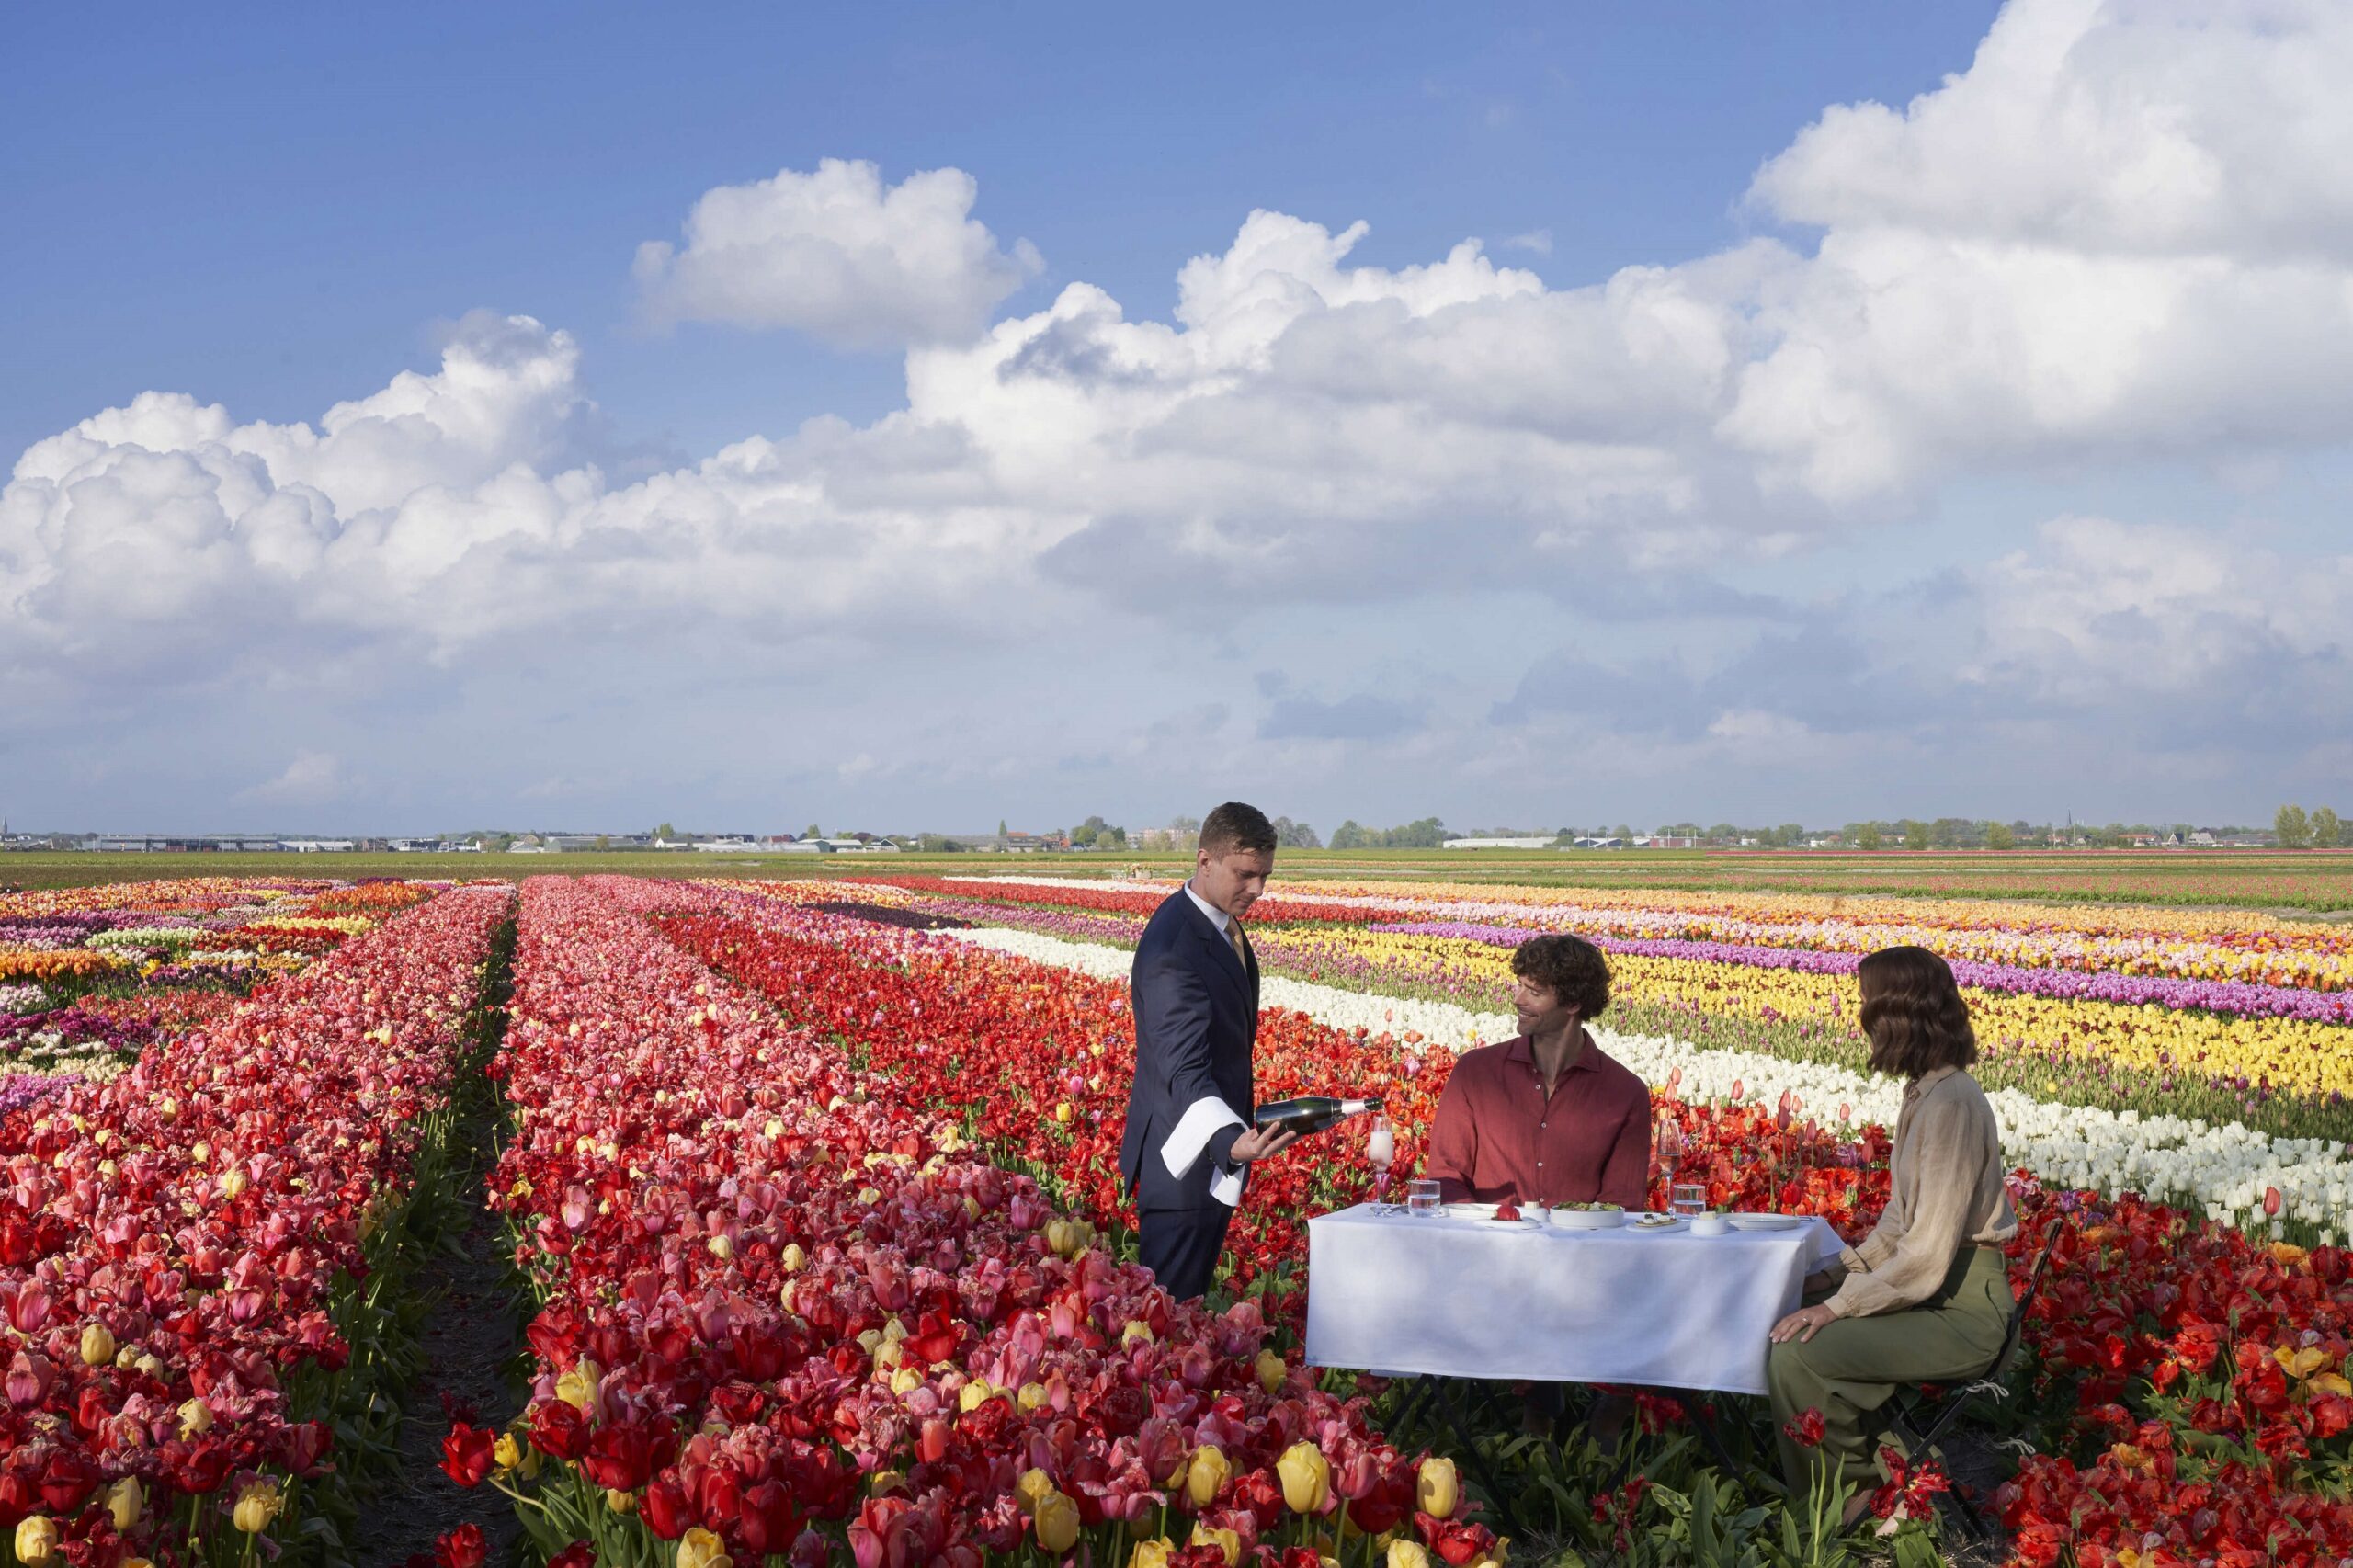 Anantara Grand Hotel Krasnapolsky Amsterdam Invites Guests to Experience the Magic of Tulips